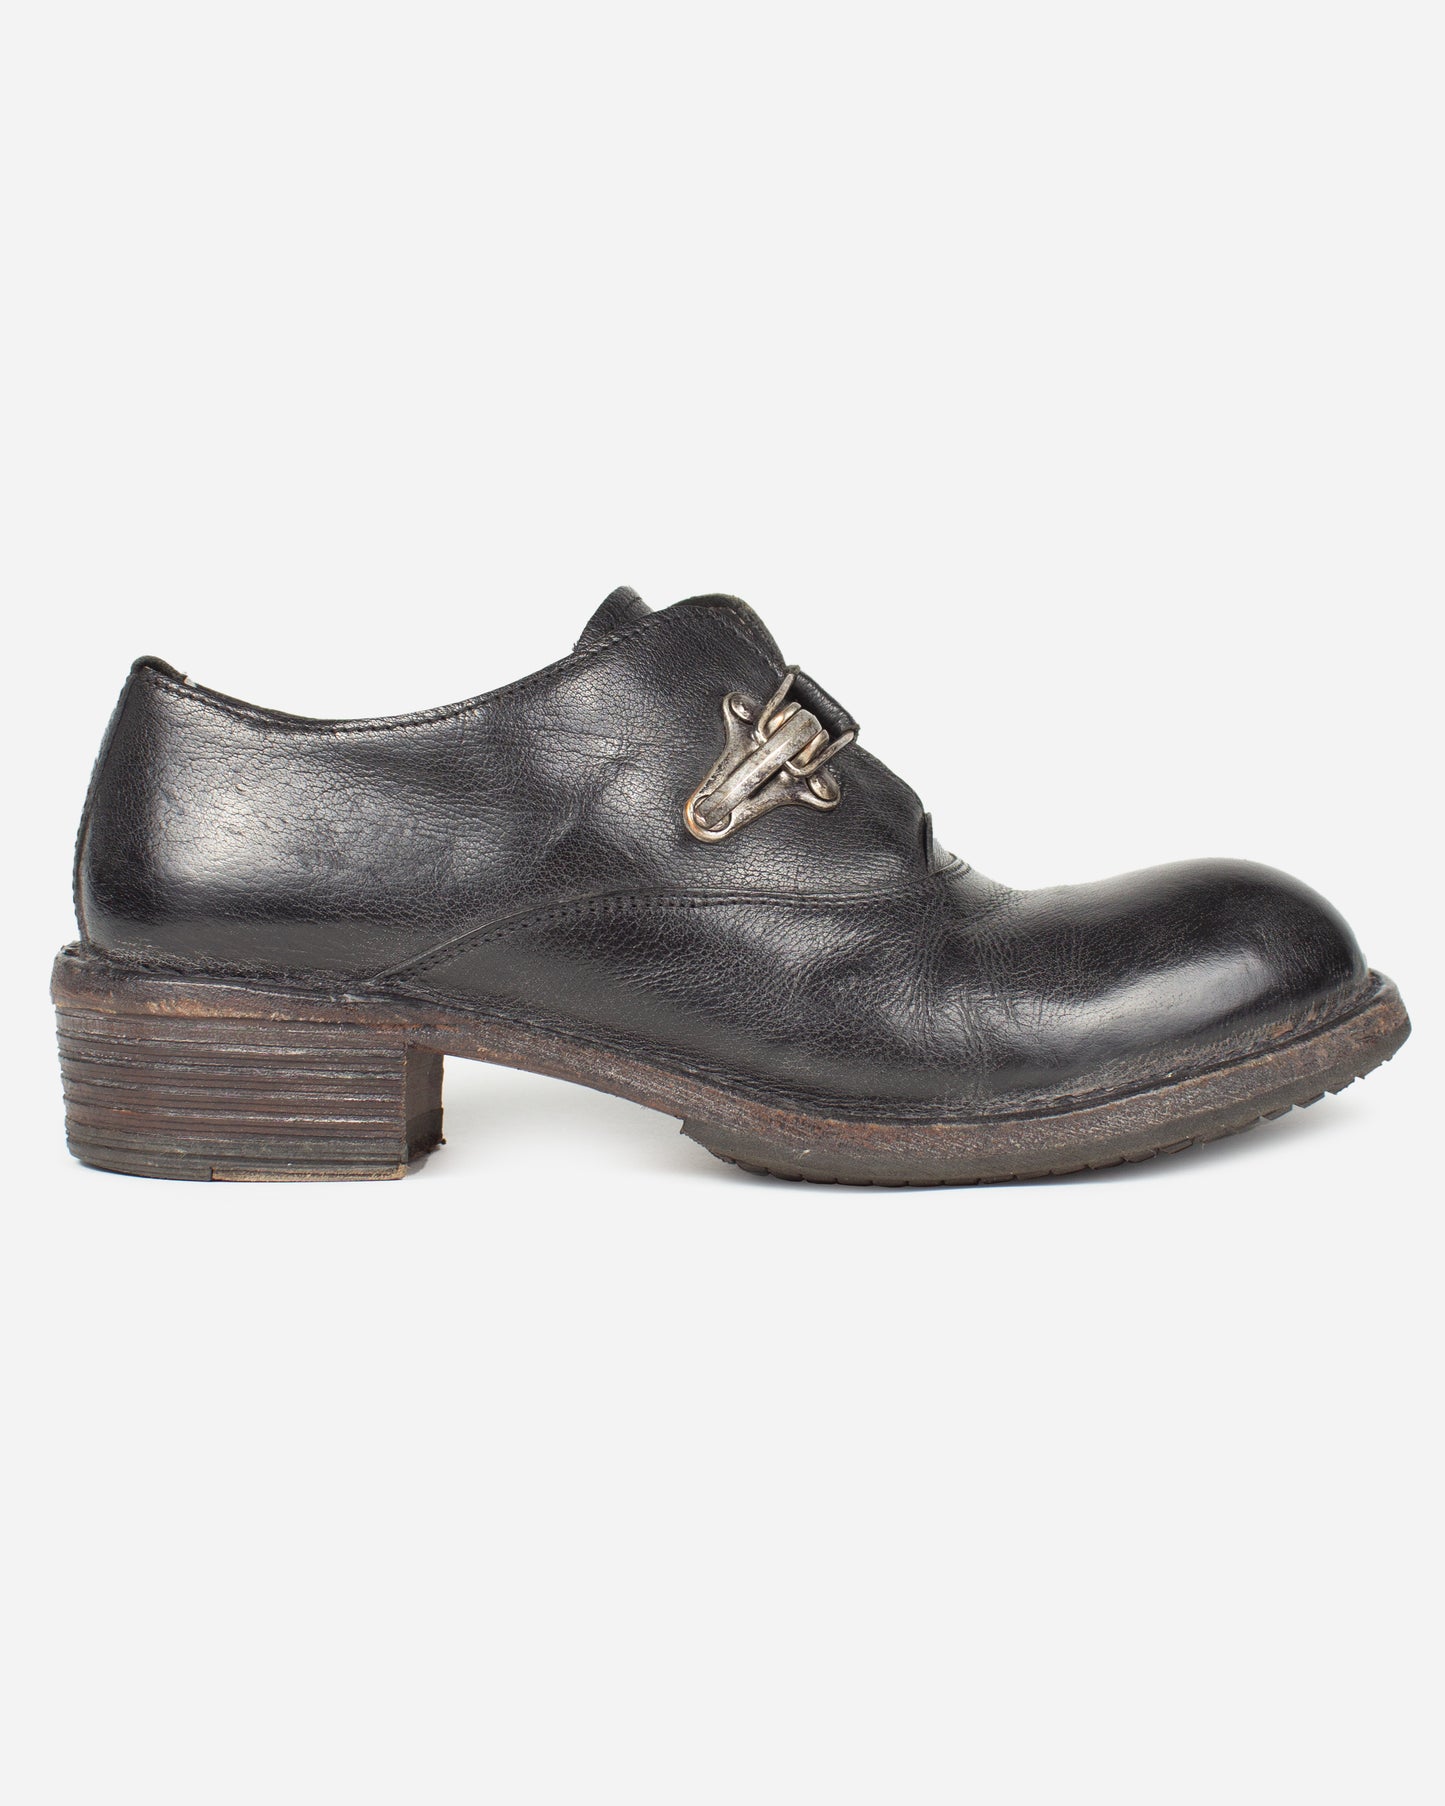 MOMA leather derbies